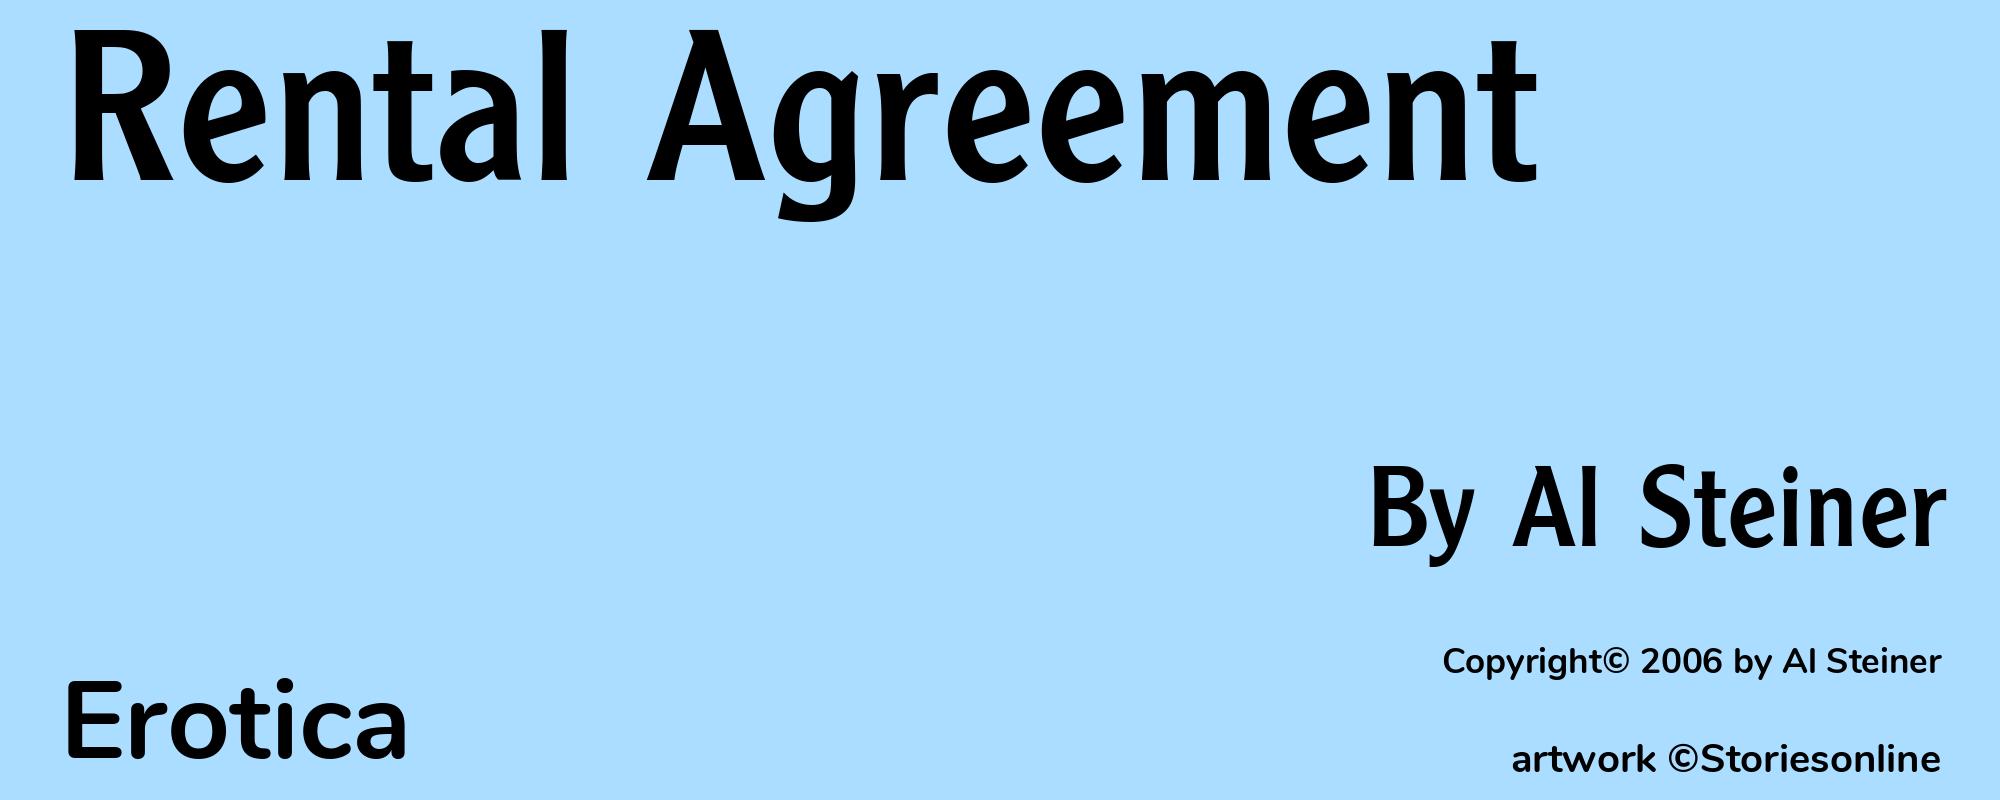 Rental Agreement - Cover